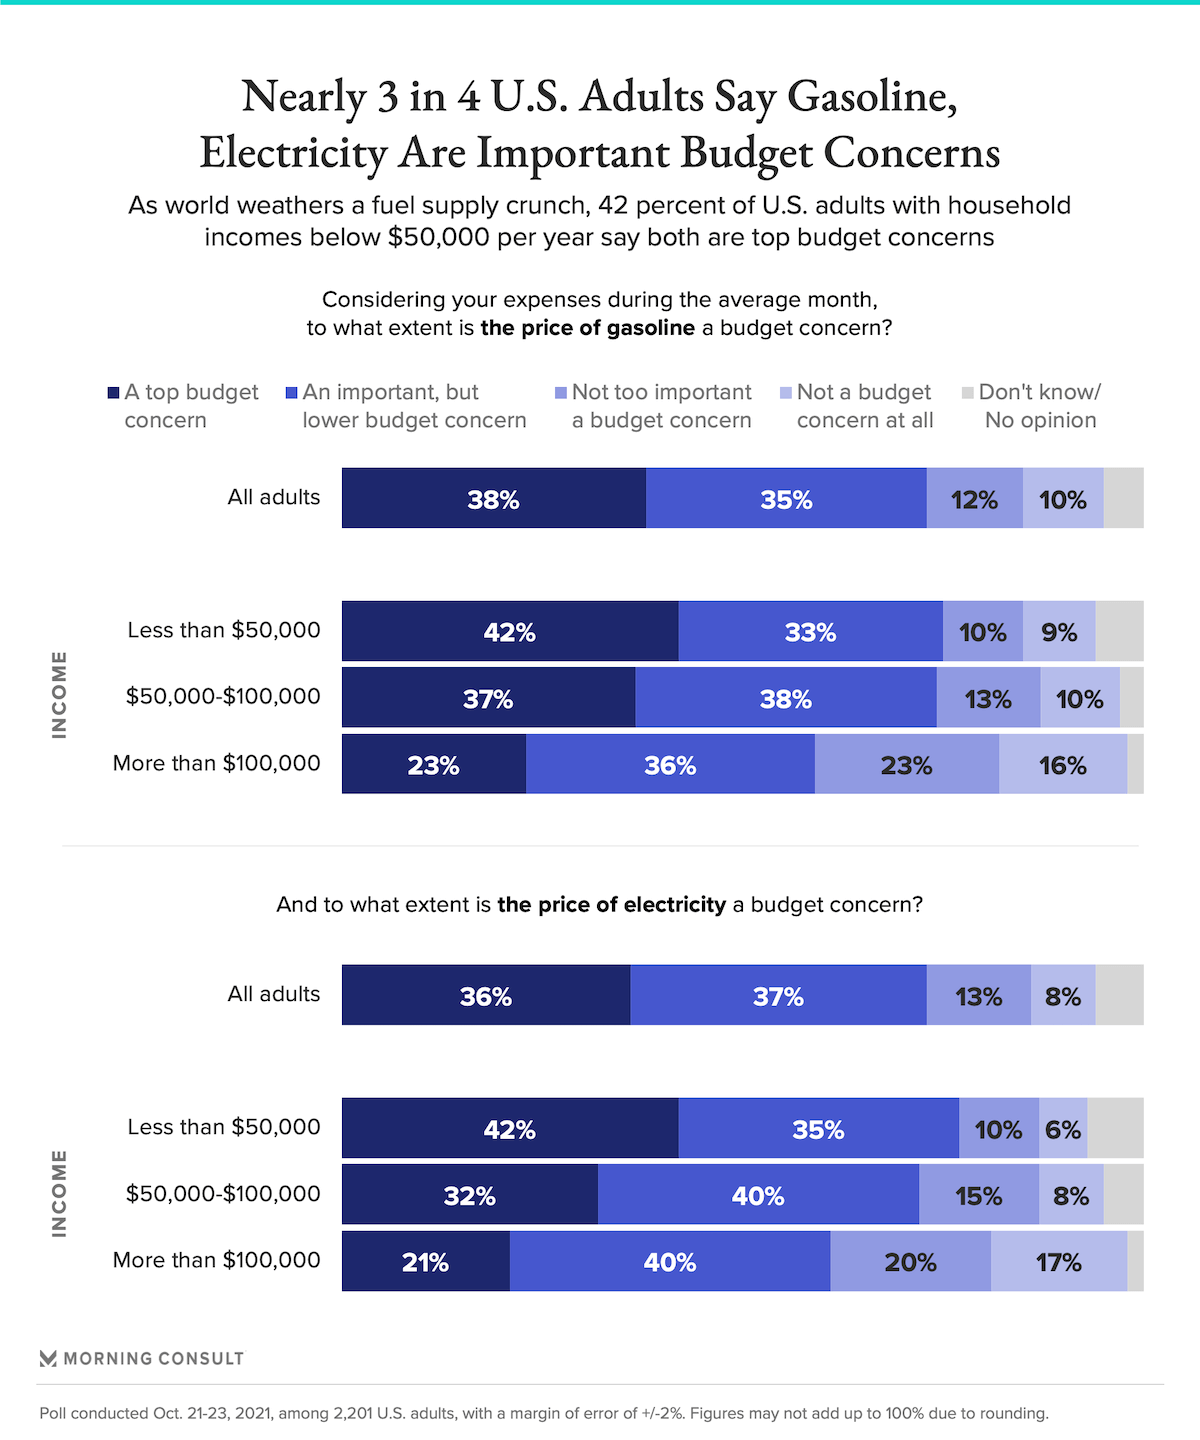 Chart showing gasoline and electricity budget concerns among U.S. adults